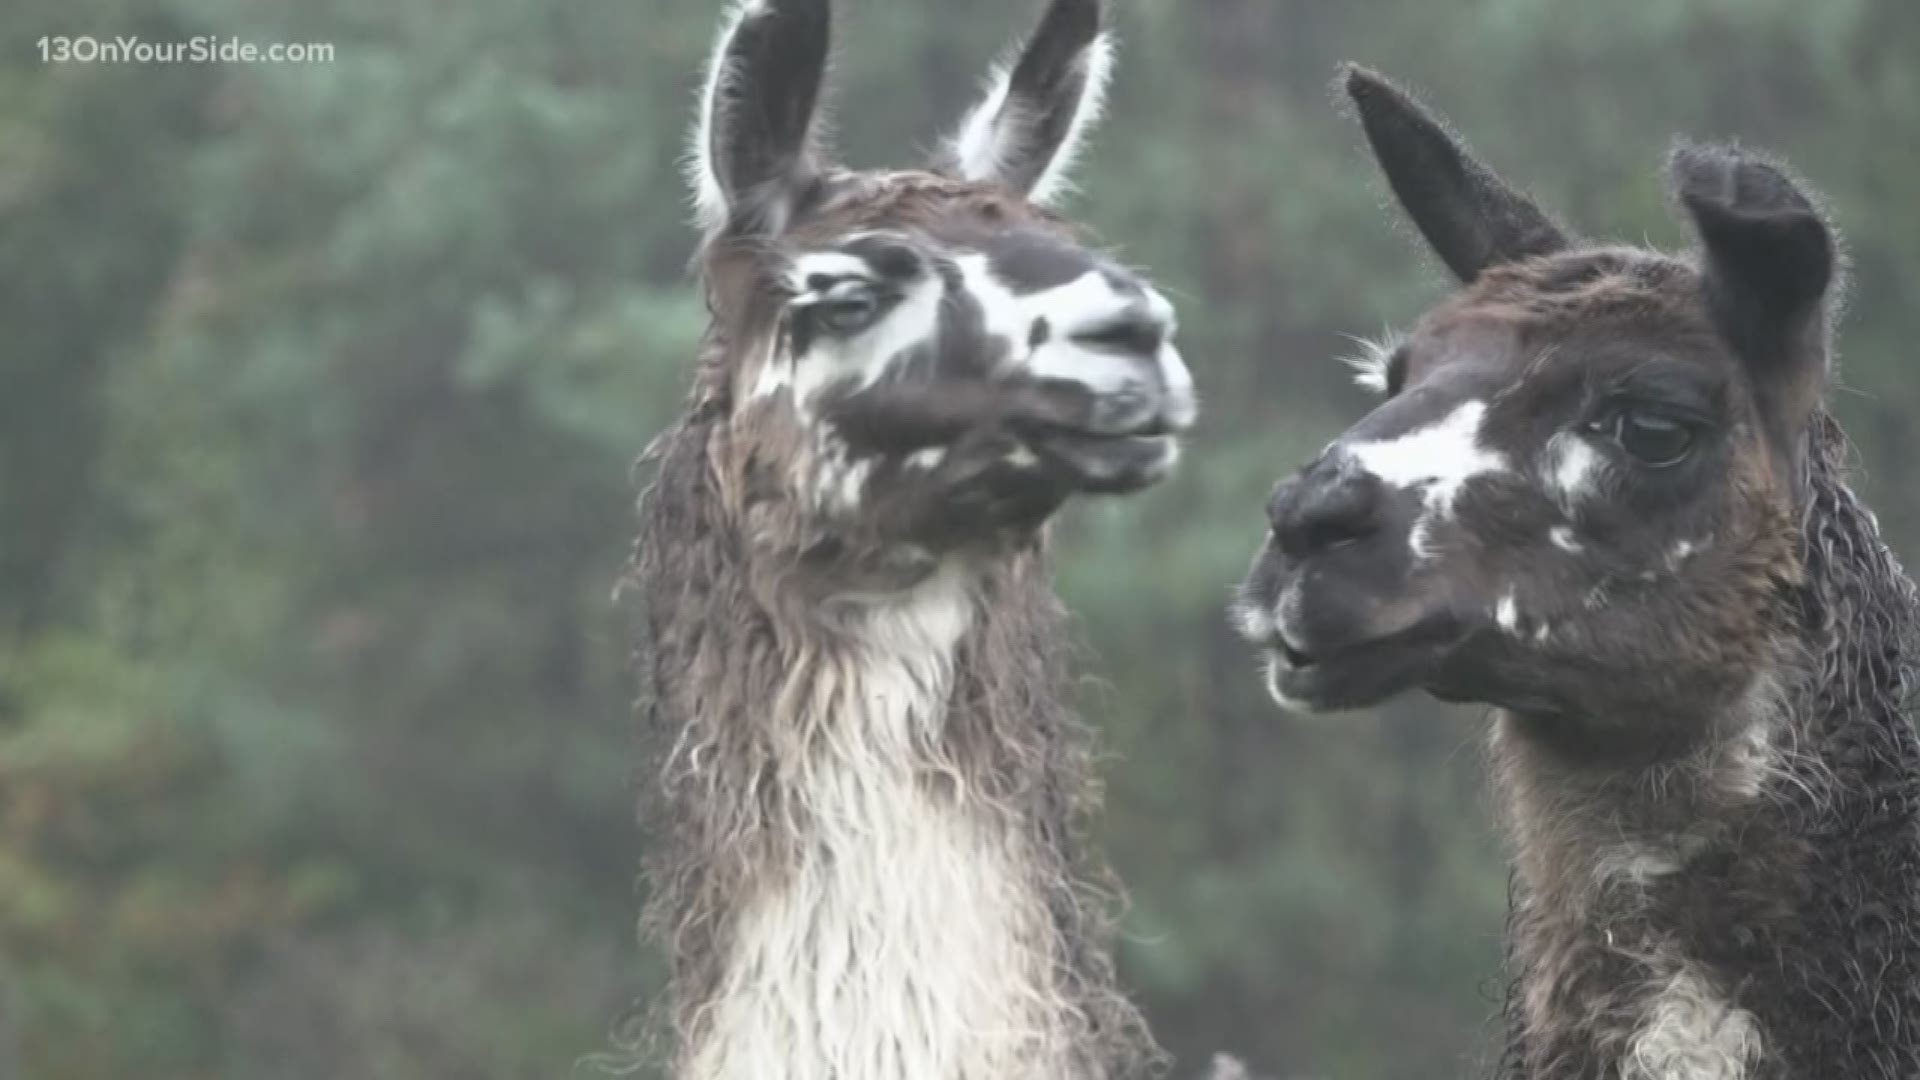 DNR officials believe the llama was attacked by a dog, based on evidence at the farm.